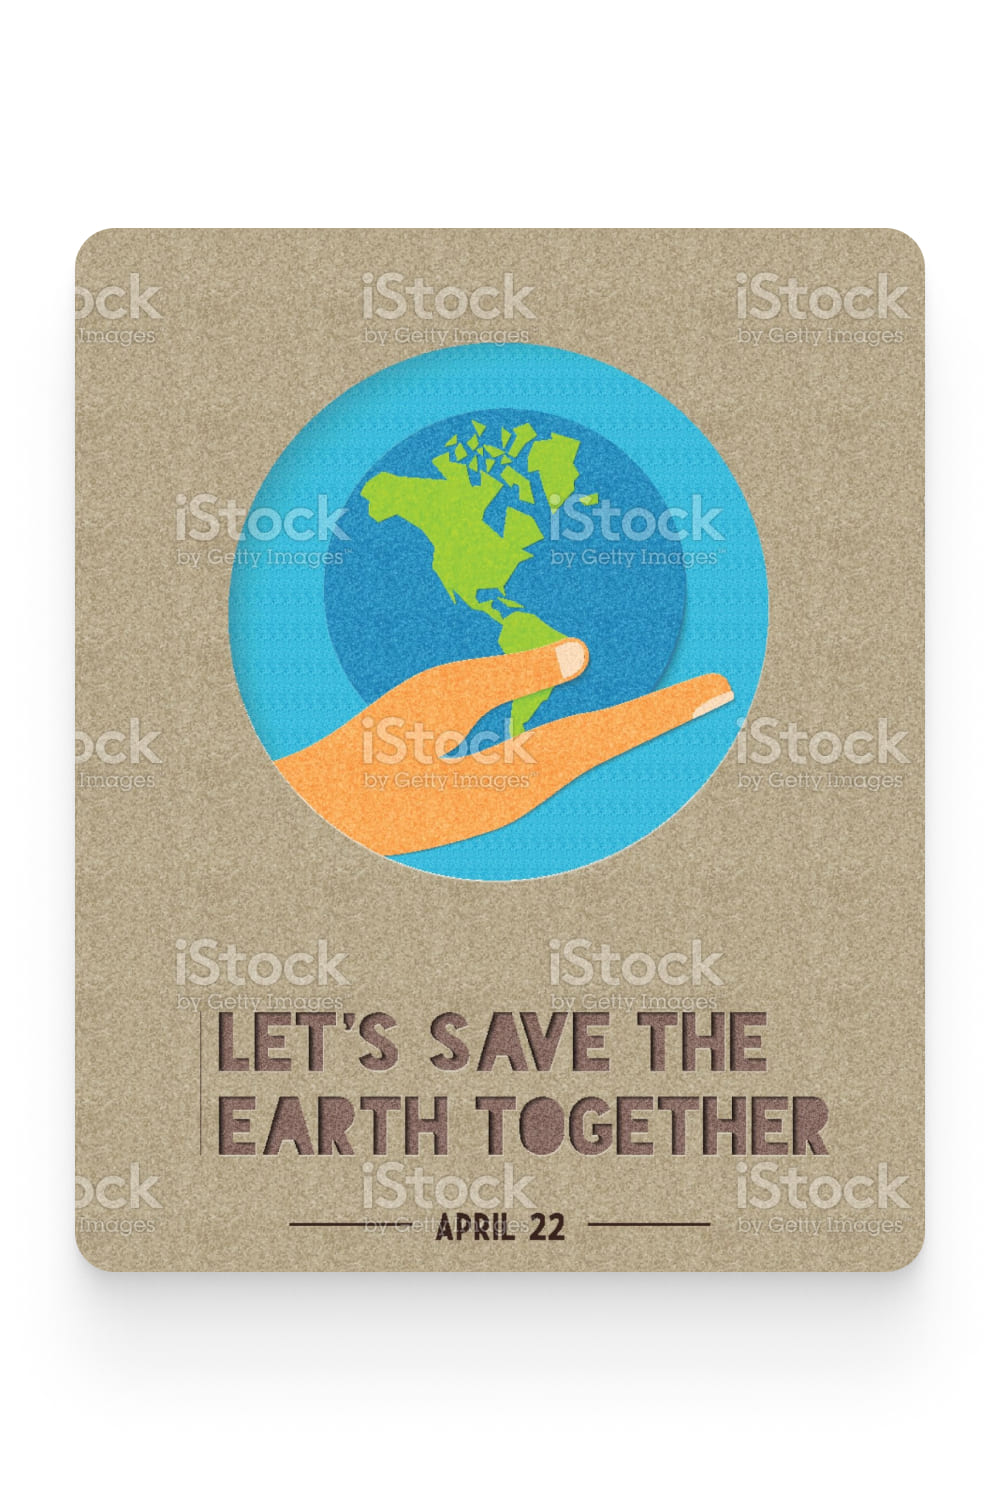 Happy Earth Day paper cut world illustration quote.